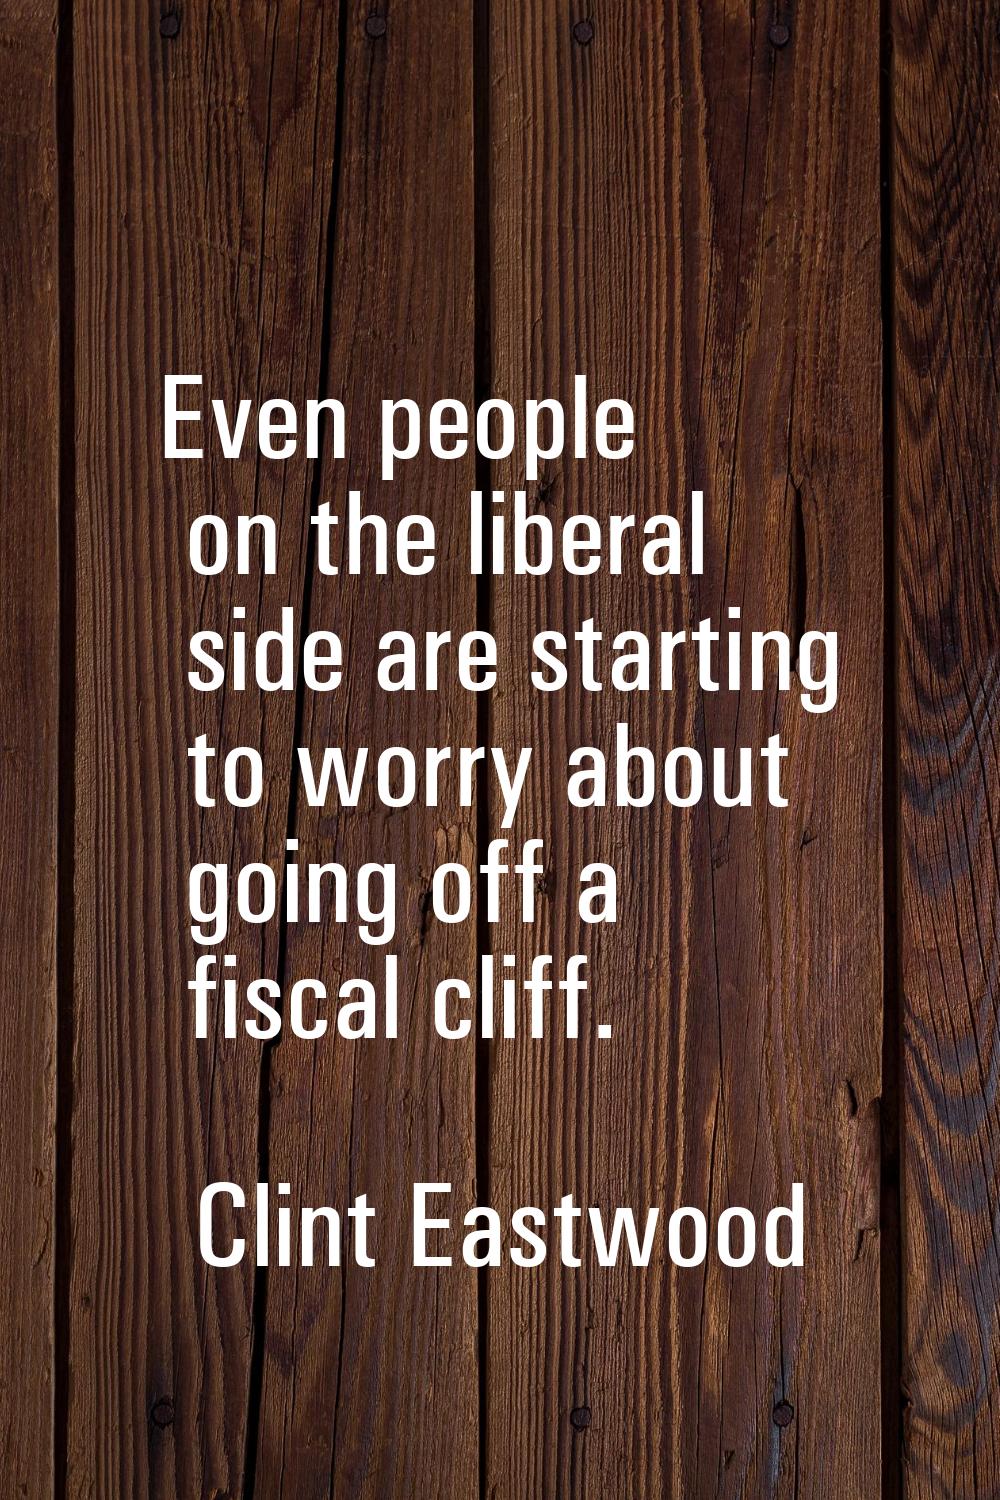 Even people on the liberal side are starting to worry about going off a fiscal cliff.